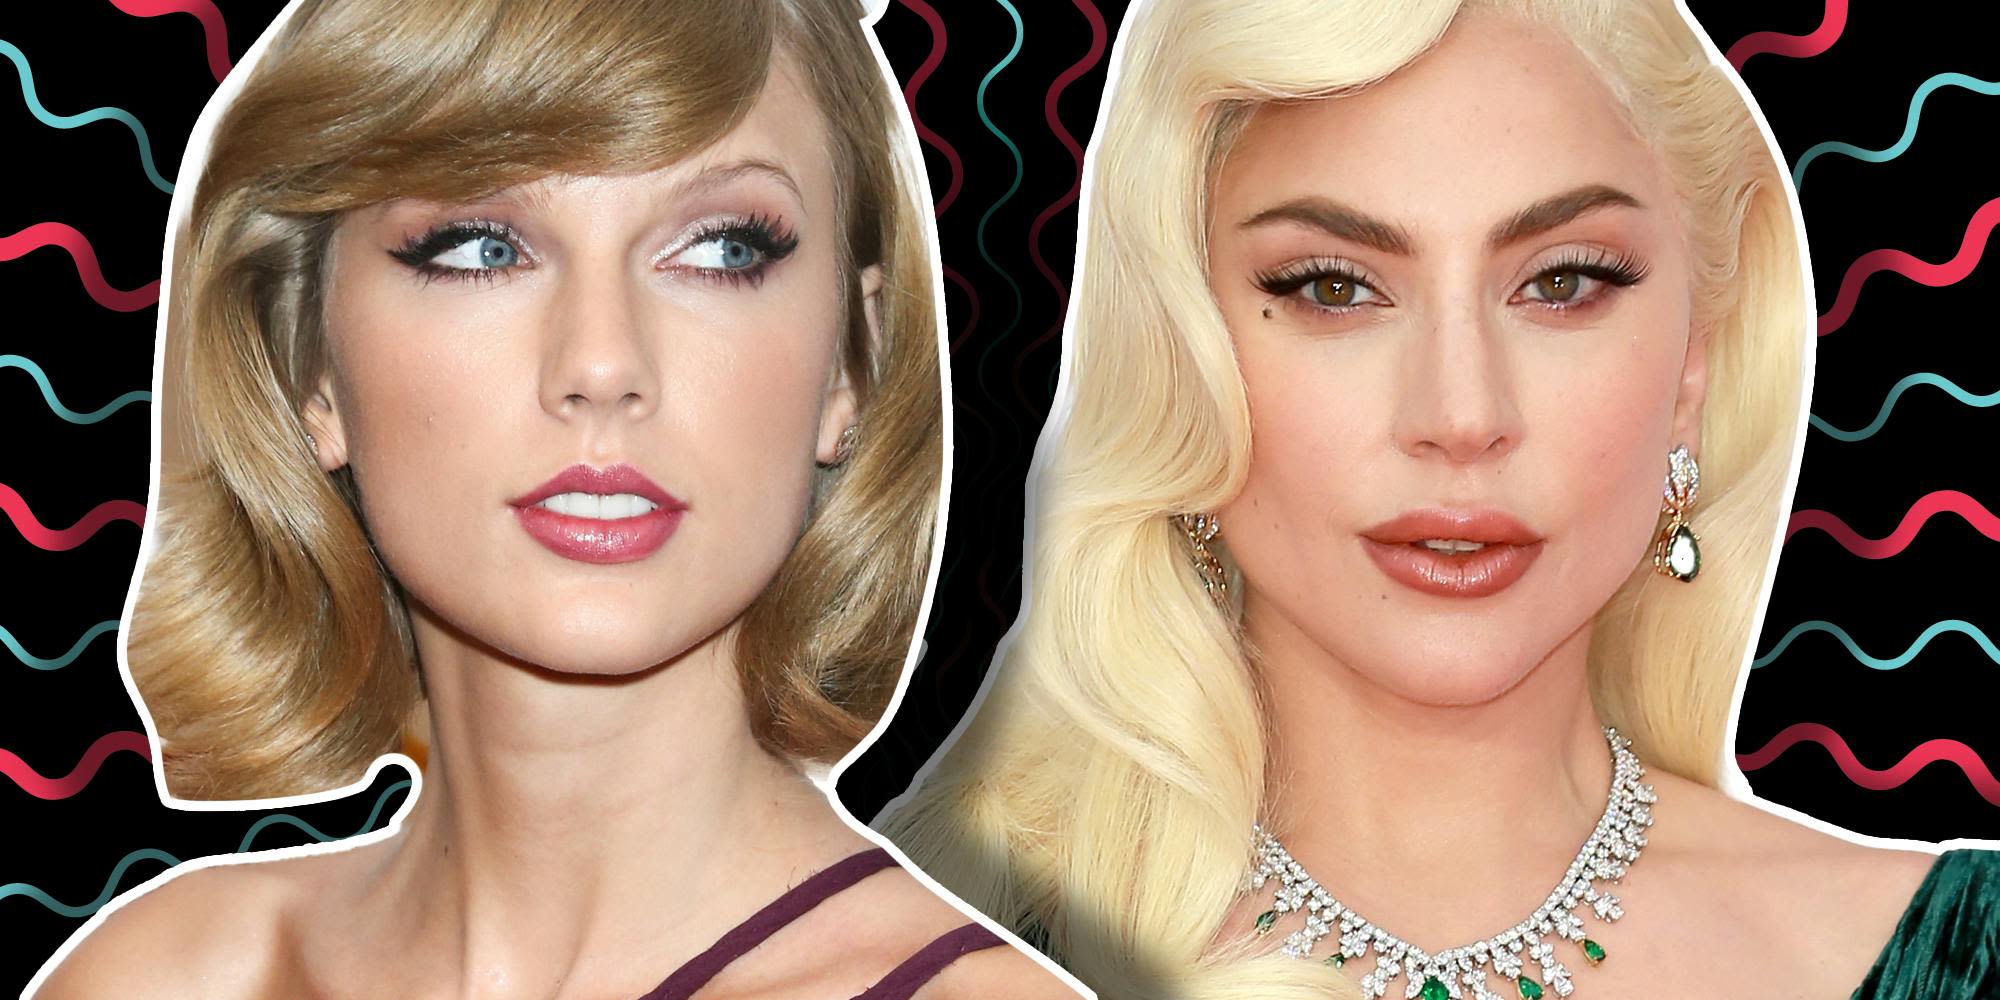 Taylor Swift comes to Lady Gaga's defense after she was body-shamed on TikTok